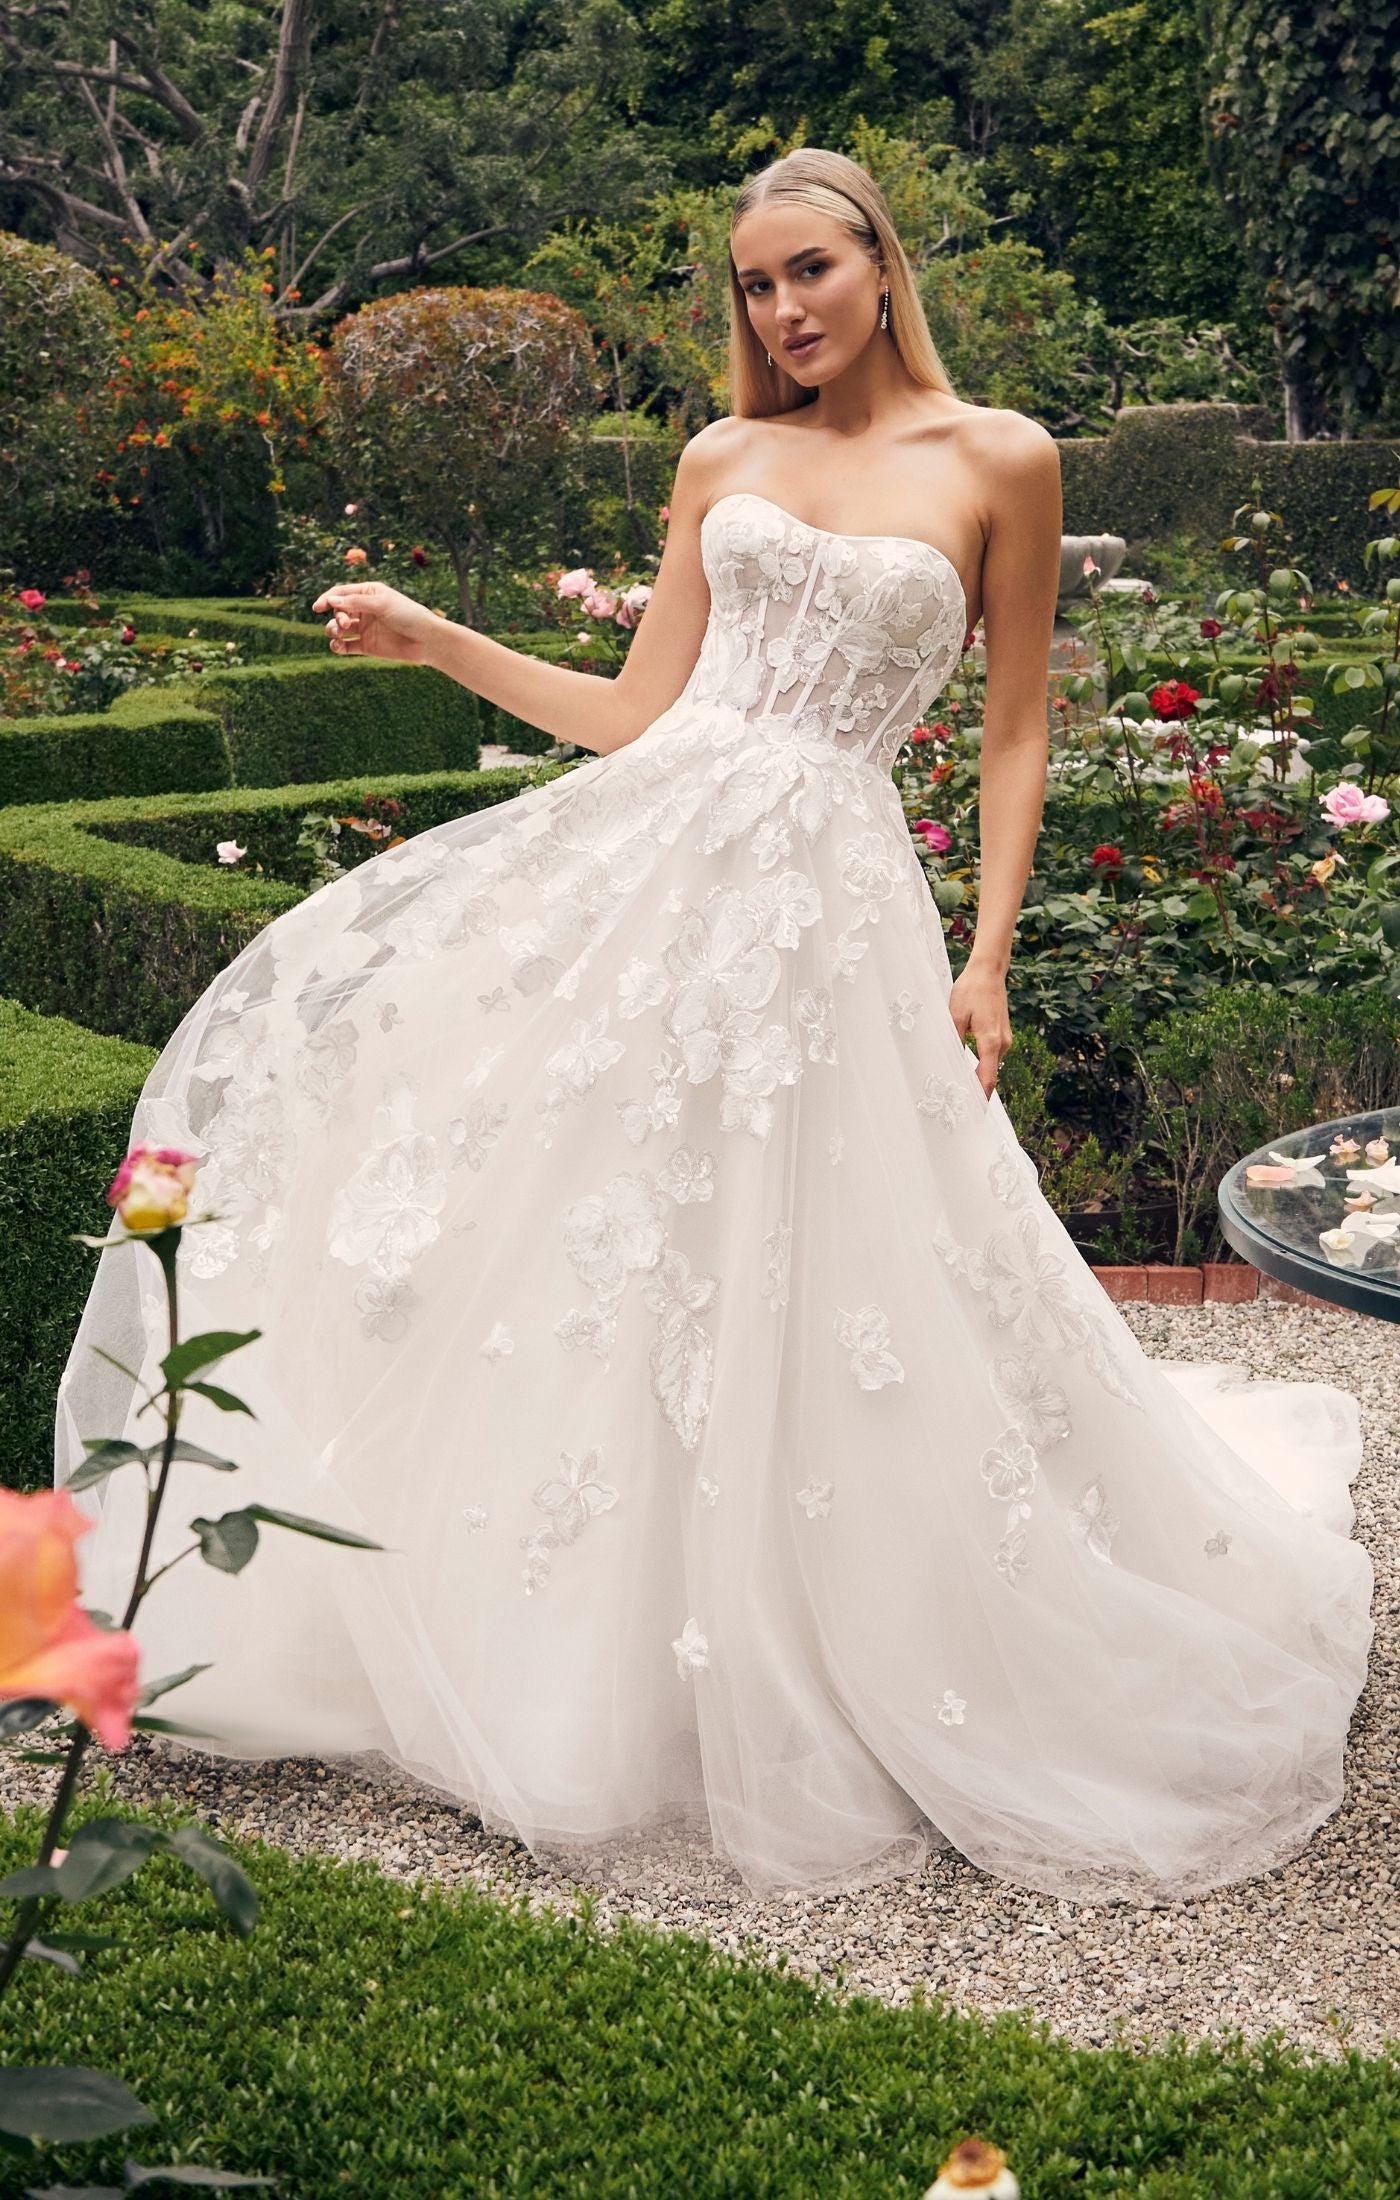 Casablanca Bridal 2540 Elloise A-Line Ballgown Strapless Sheer Floral Corset Sweetheart Neckline Open Back Train Wedding Gown. Prepare to be swept away by the ethereal beauty of Style 2540 Elloise, our exquisite A-line wedding dress. The strapless modified sweetheart neckline exudes romance and sophistication, beautifully framing your face and shoulders.